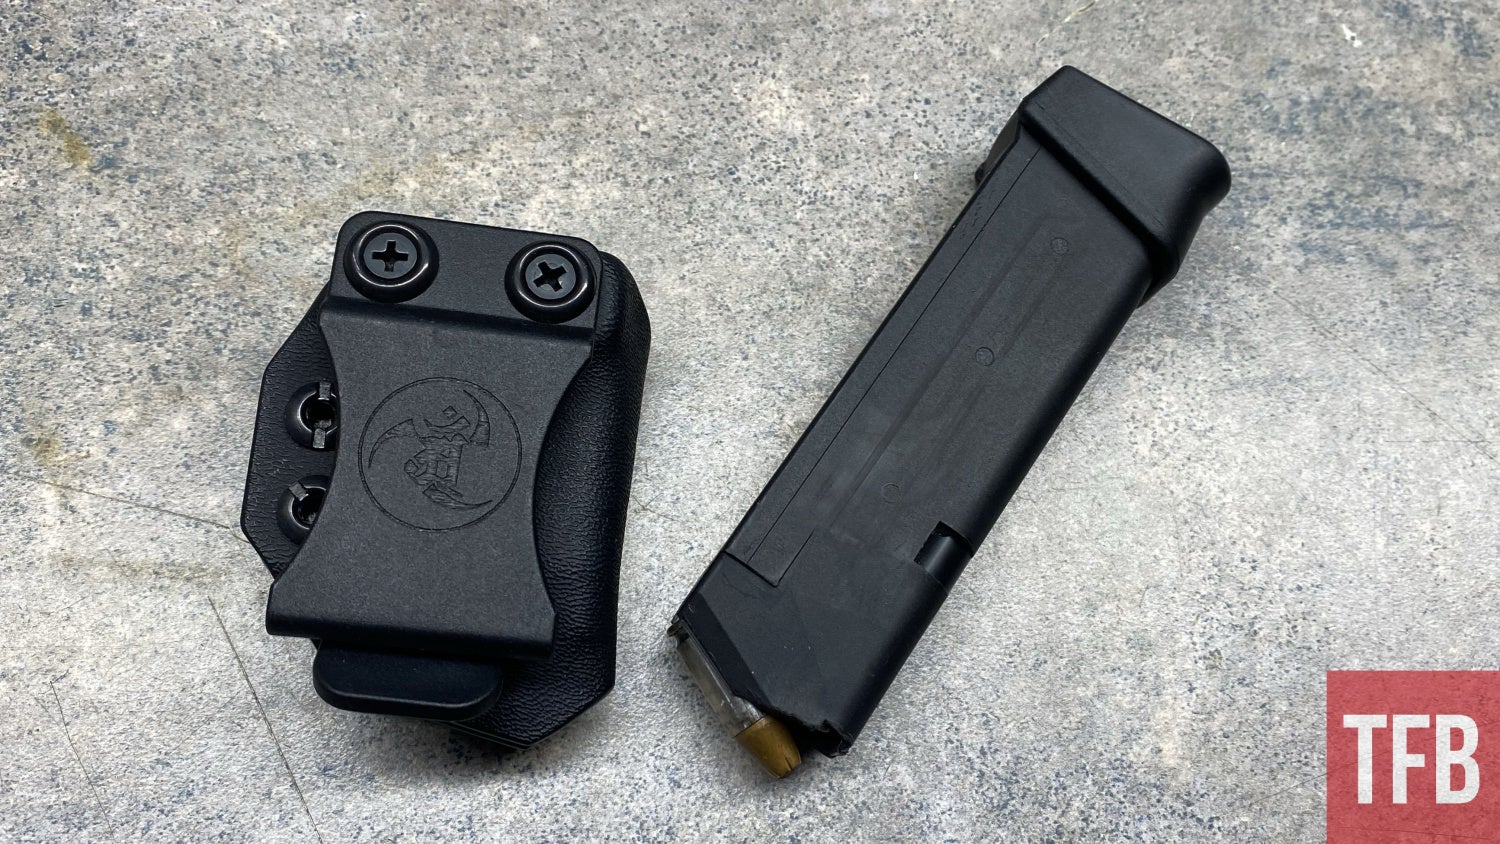 Concealed Carry Corner: Different Ways To Carry A Spare Magazine